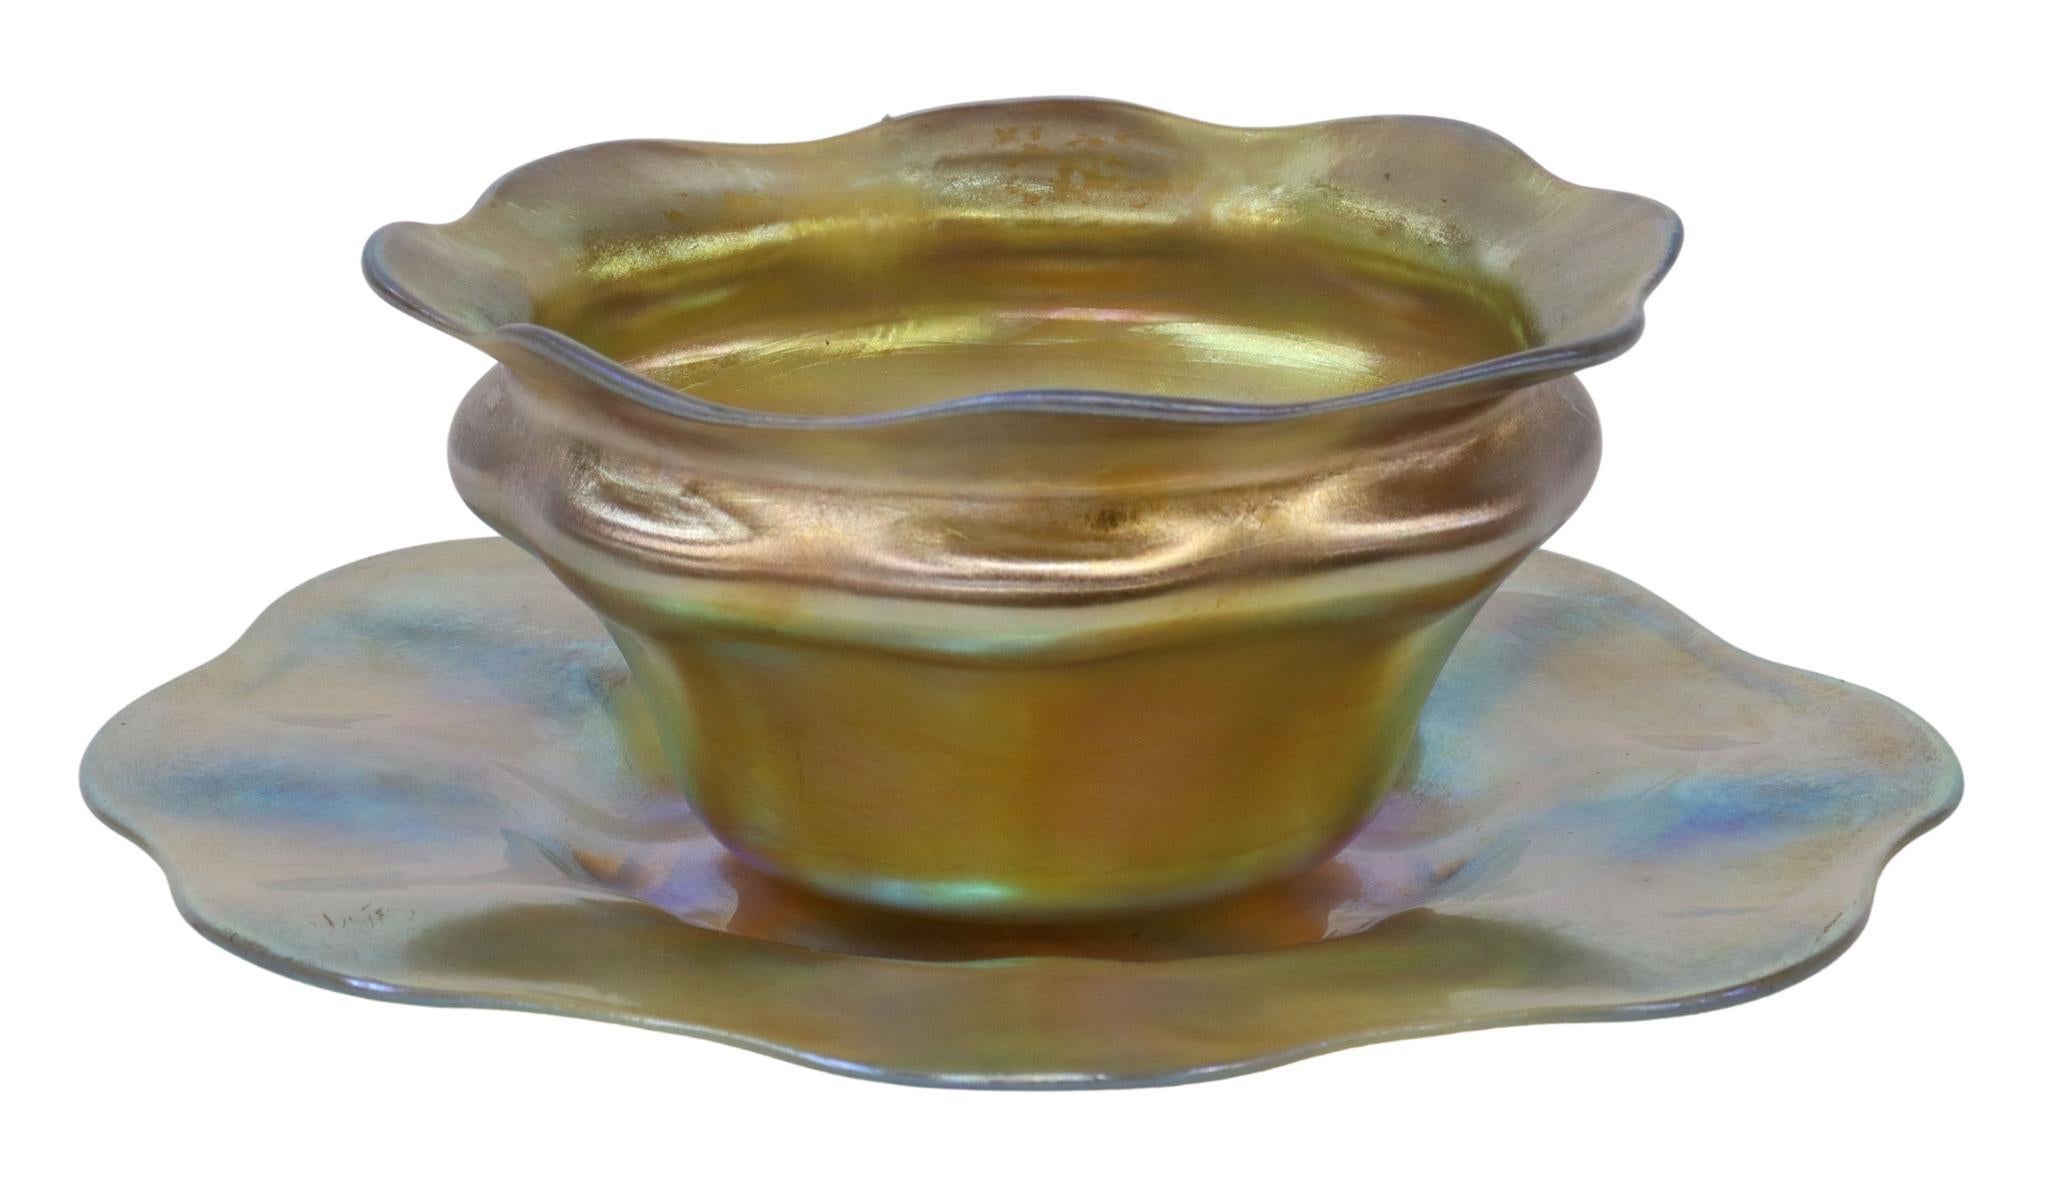 Beautiful favrile art glass bowl and underplate, Louis Comfort Tiffany (New York, 1848-1933), early 20th c., iridescent gold glass, with gently scalloped rim, engraved signature 